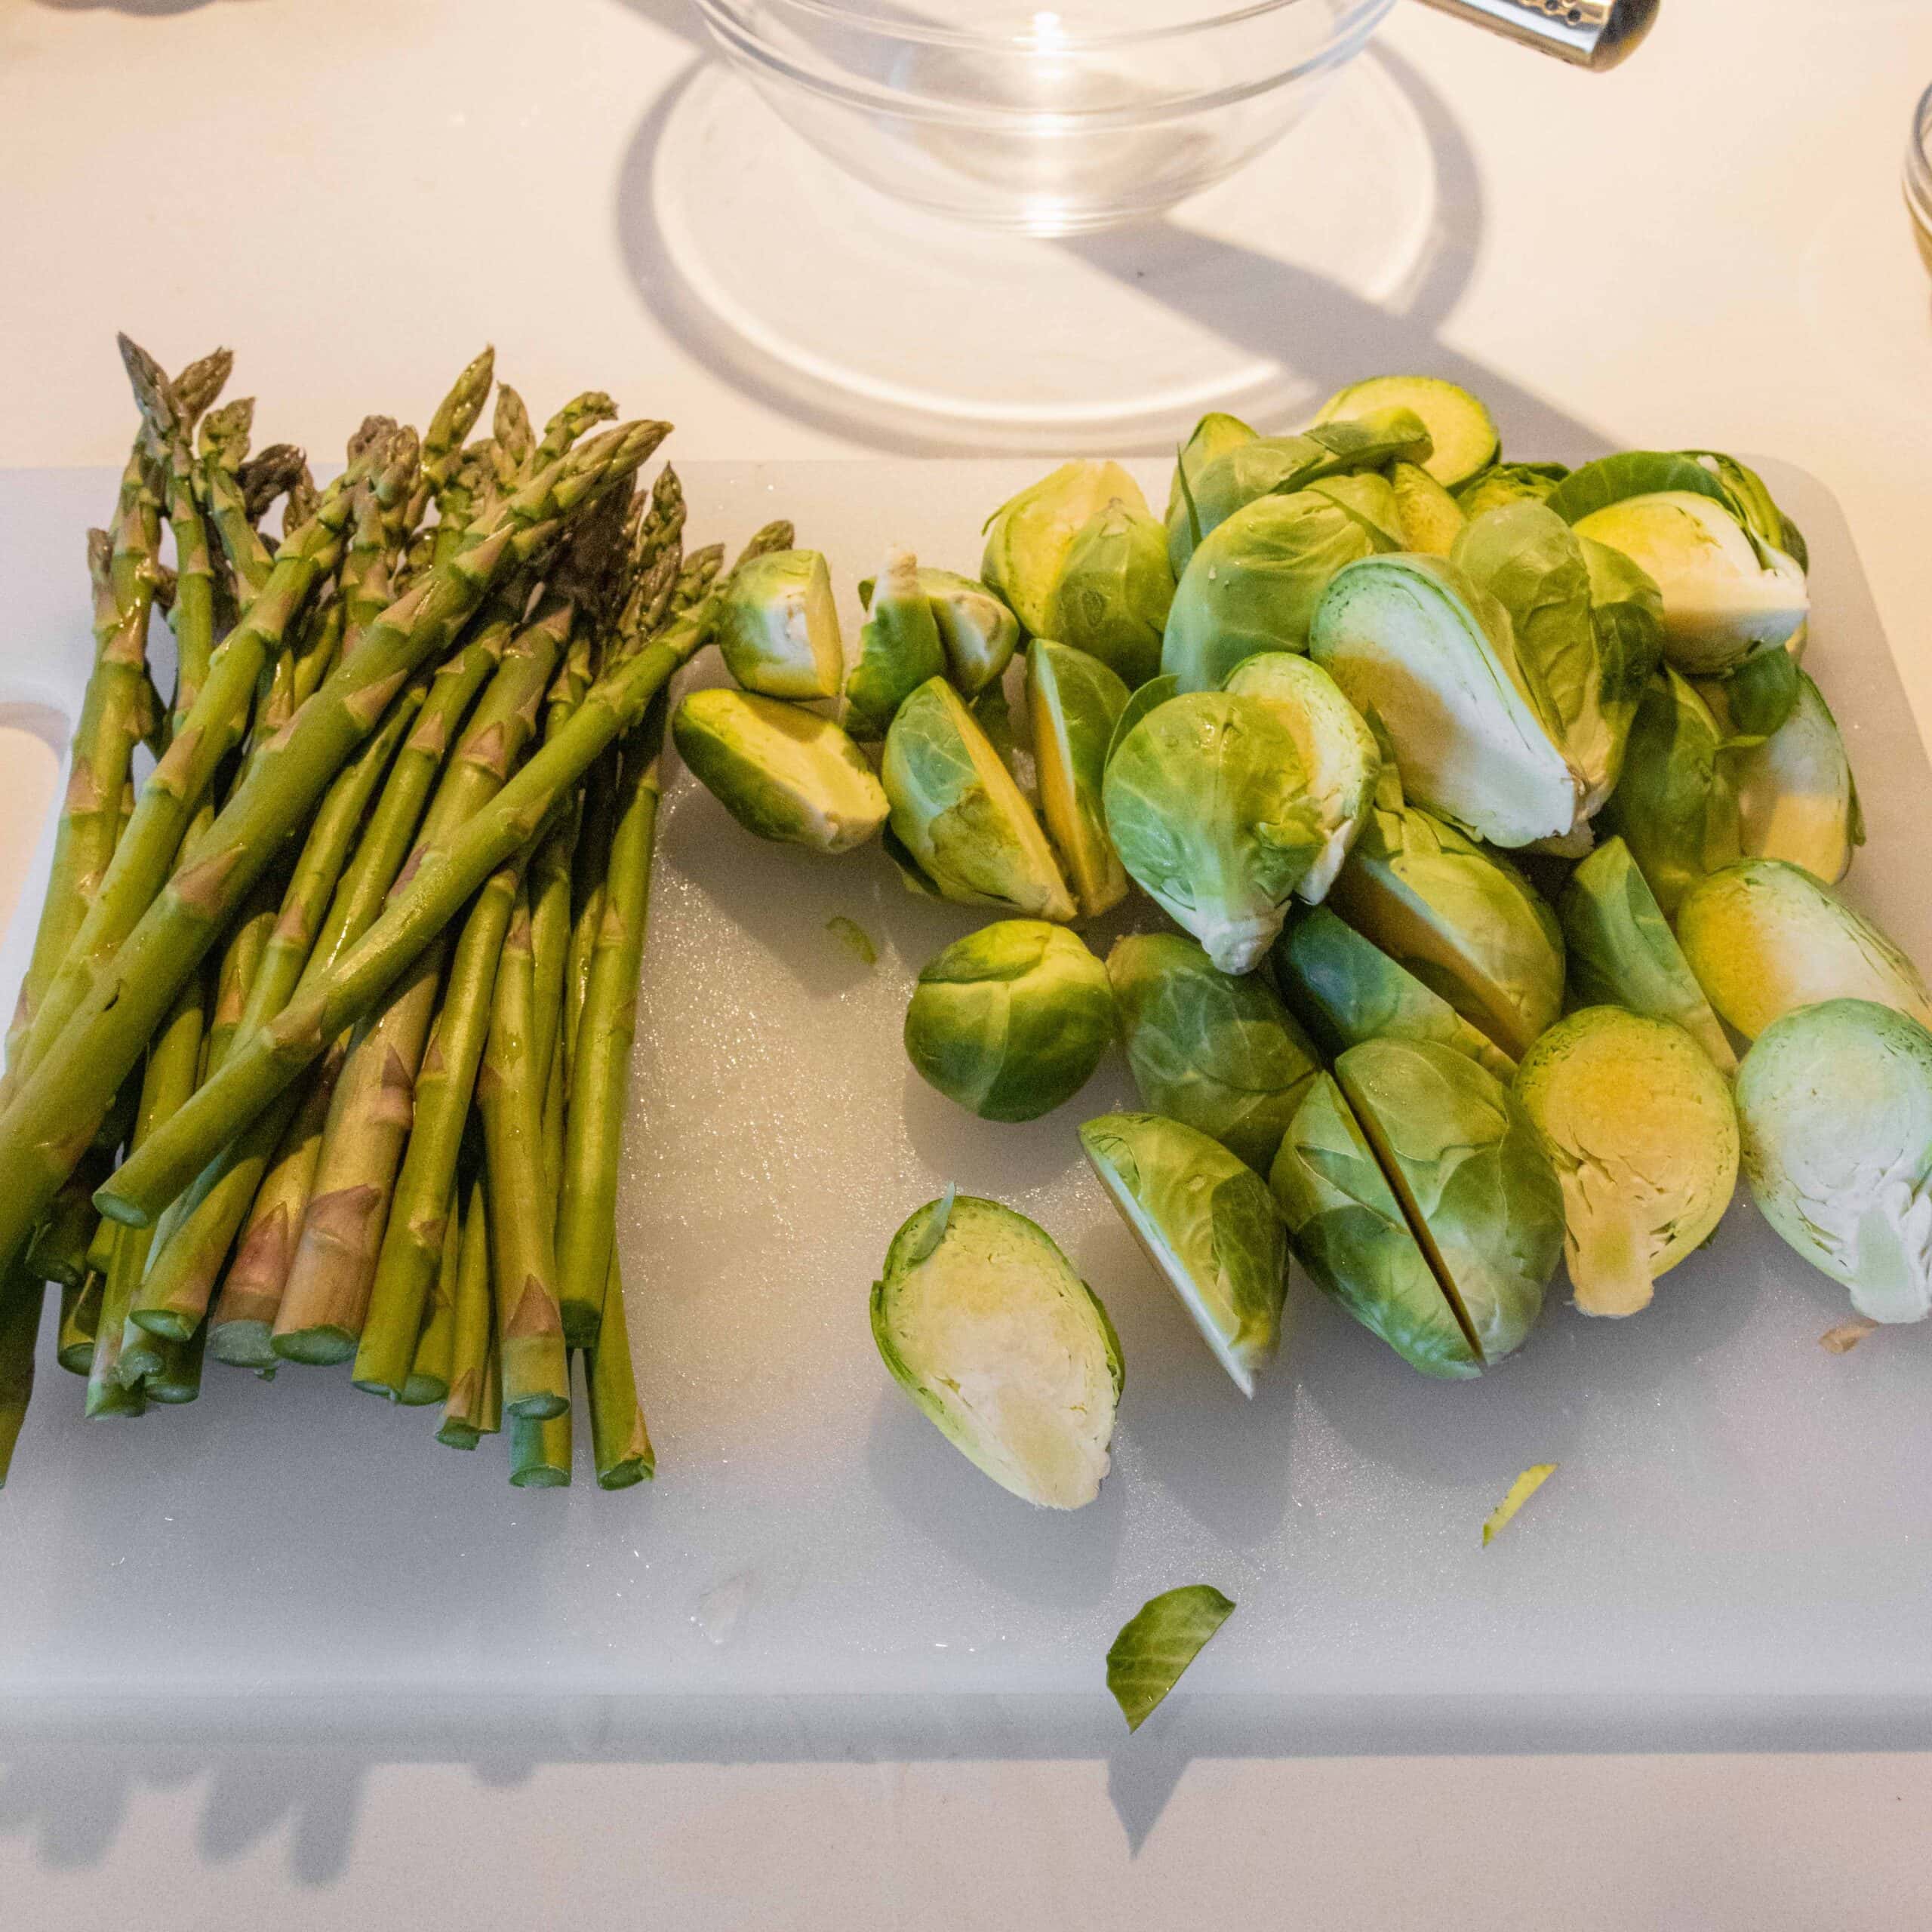 asparagus and brussels sprouts on a cutting board